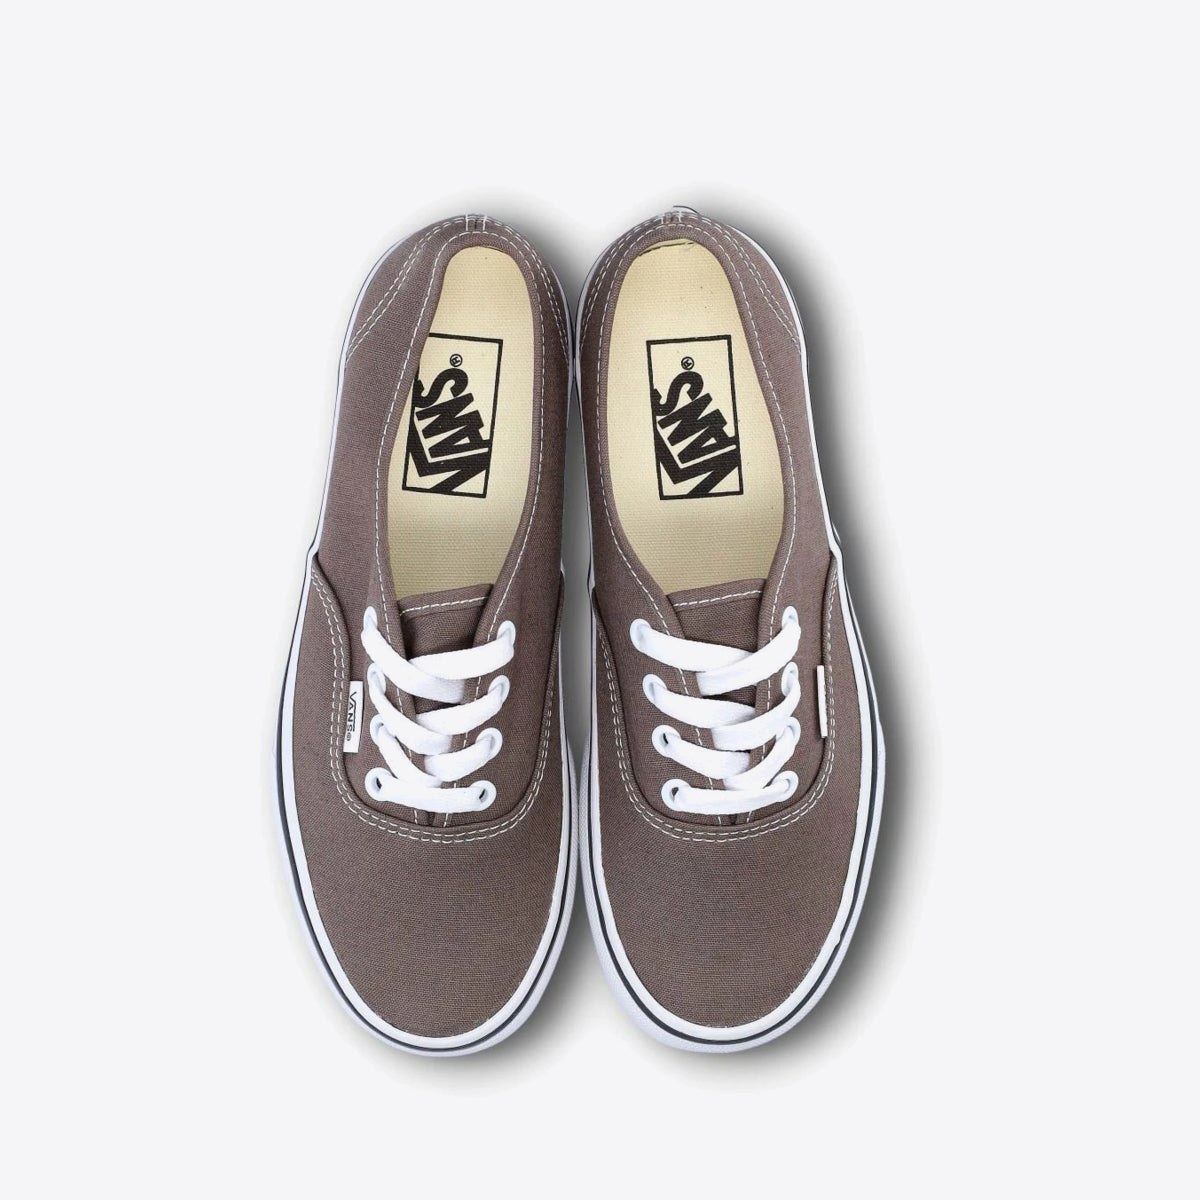 VANS Authentic Colour Theory Bungee Cord - Image 9